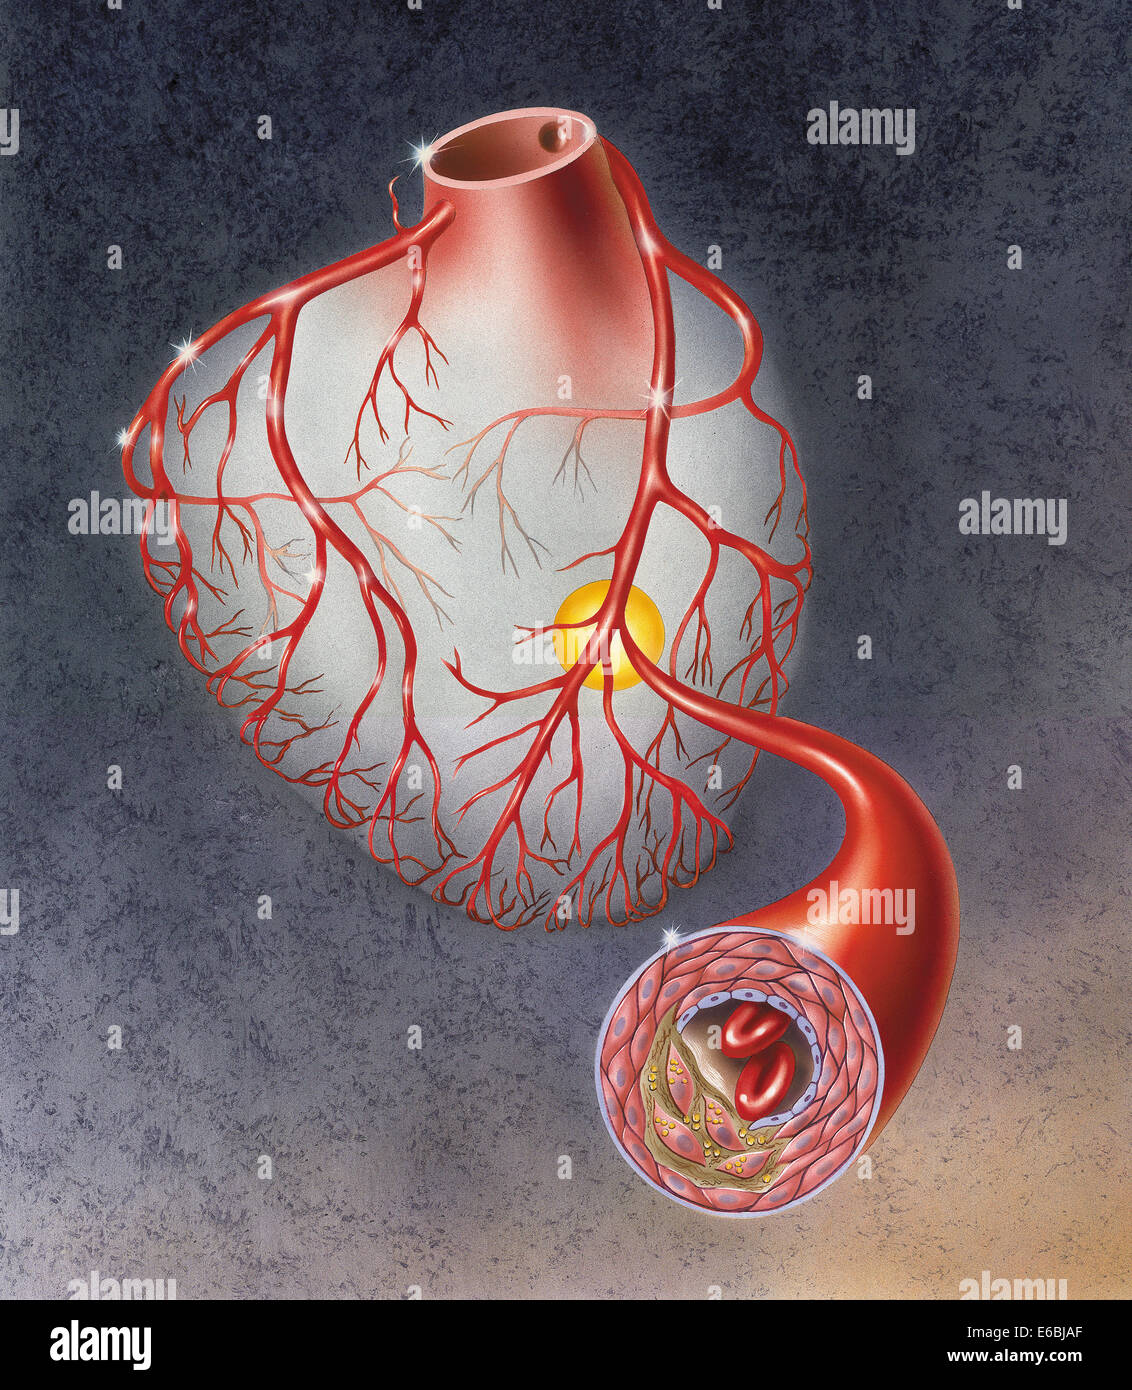 Arteries on heart showing atherosclerotic plaque in an artery. Stock Photo